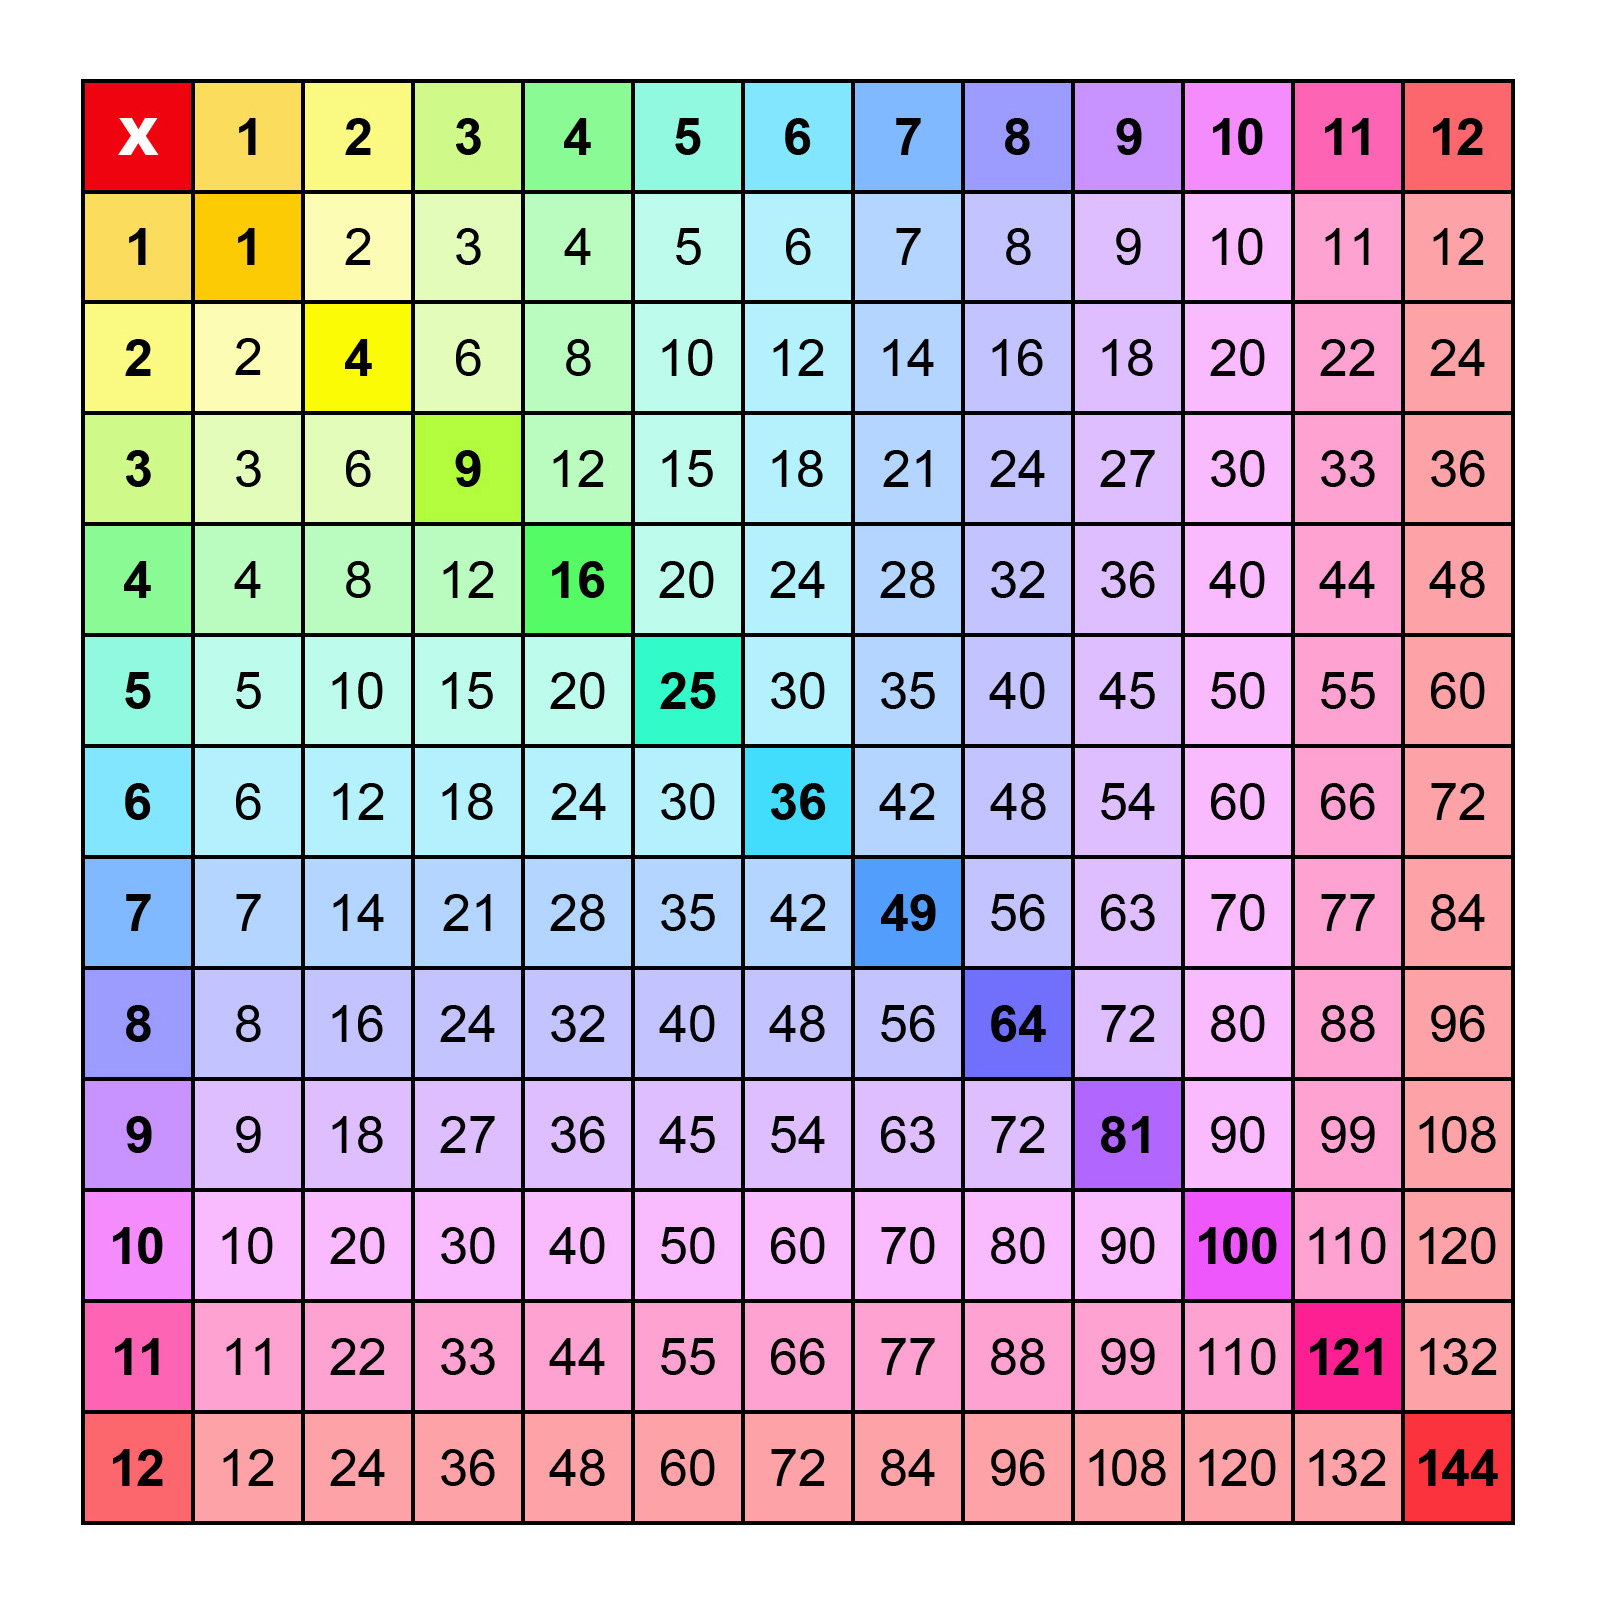 10 By 12 Multiplication Chart